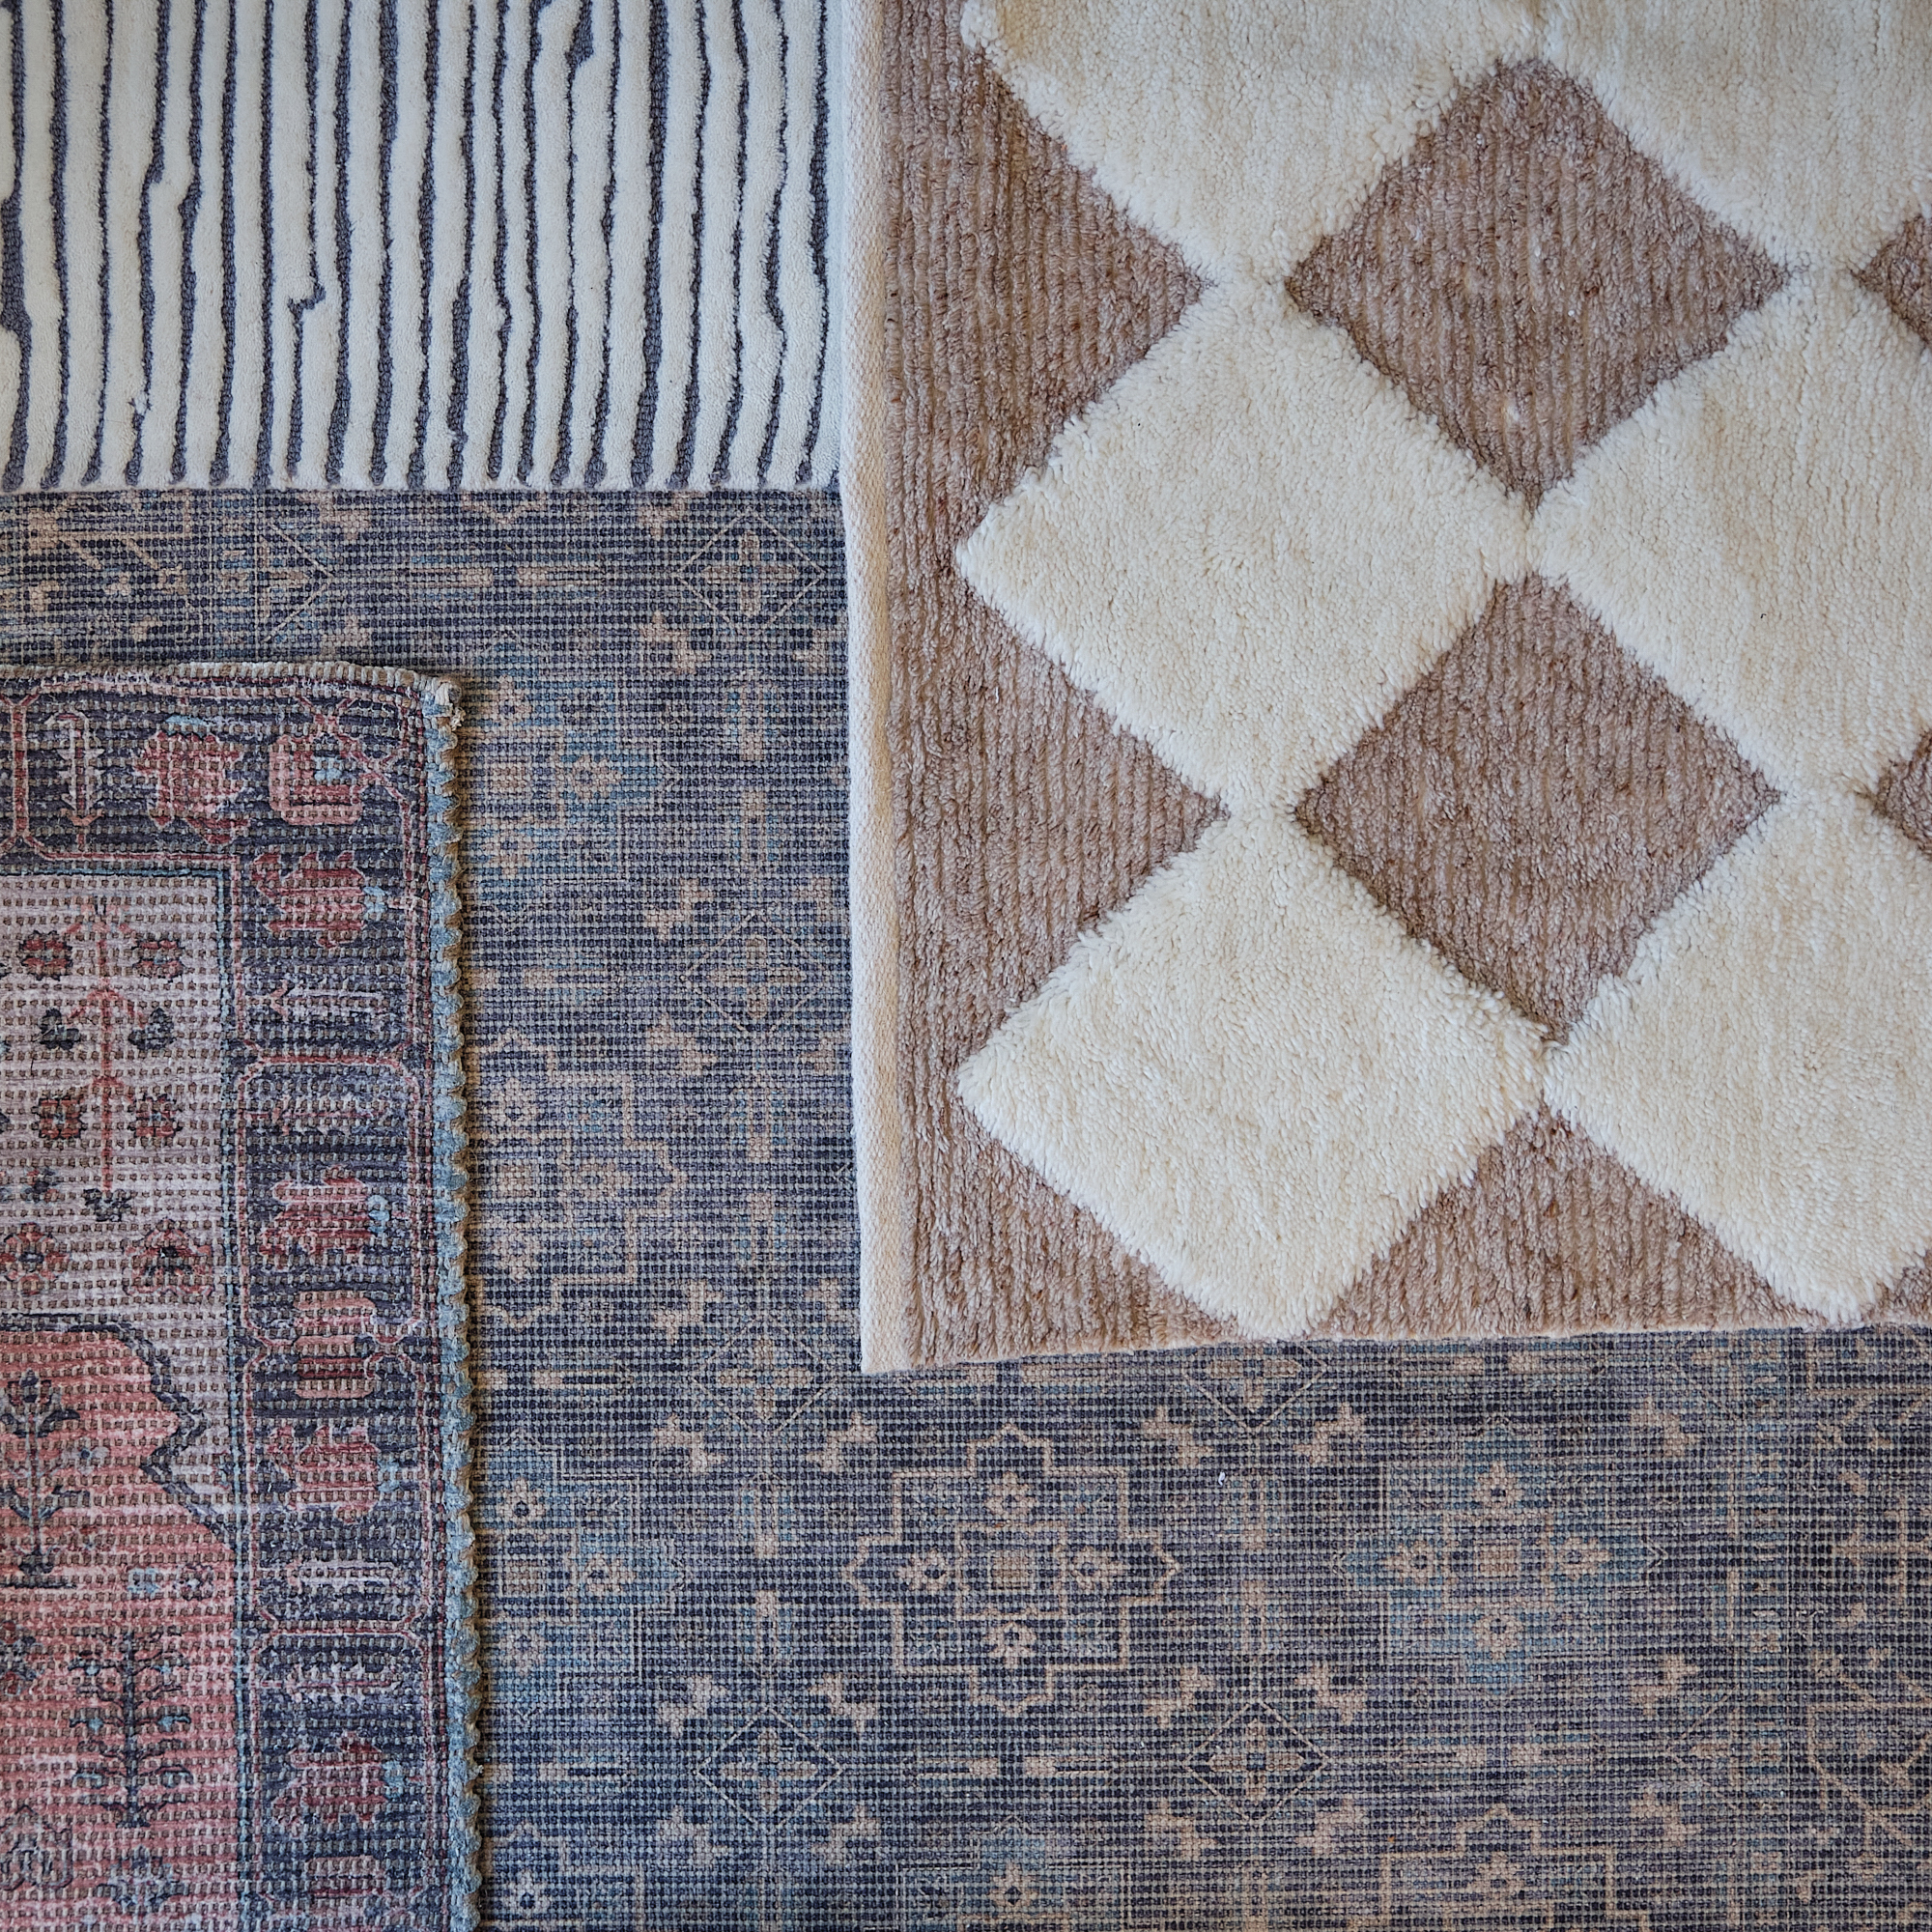 Top down view of multiple patterened rugs